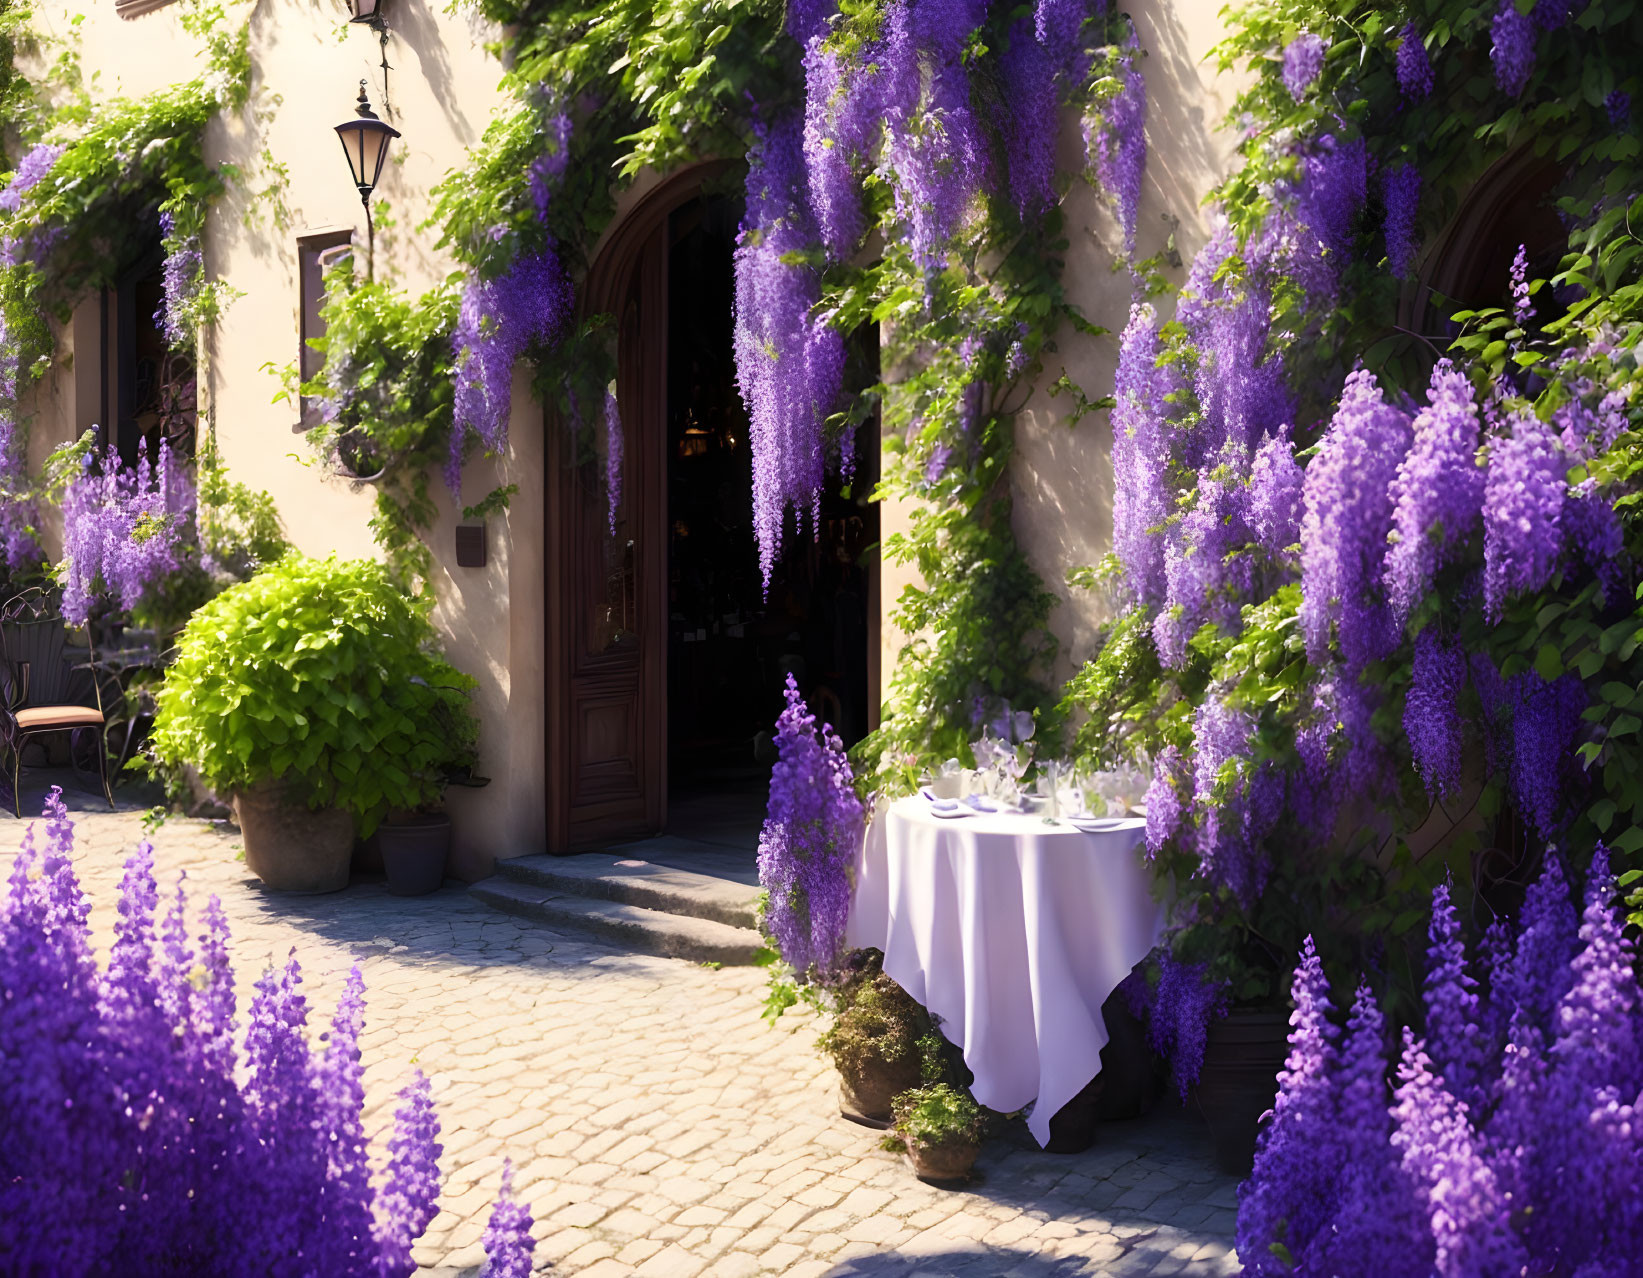 Charming outdoor dining area with hanging wisteria and lush greenery